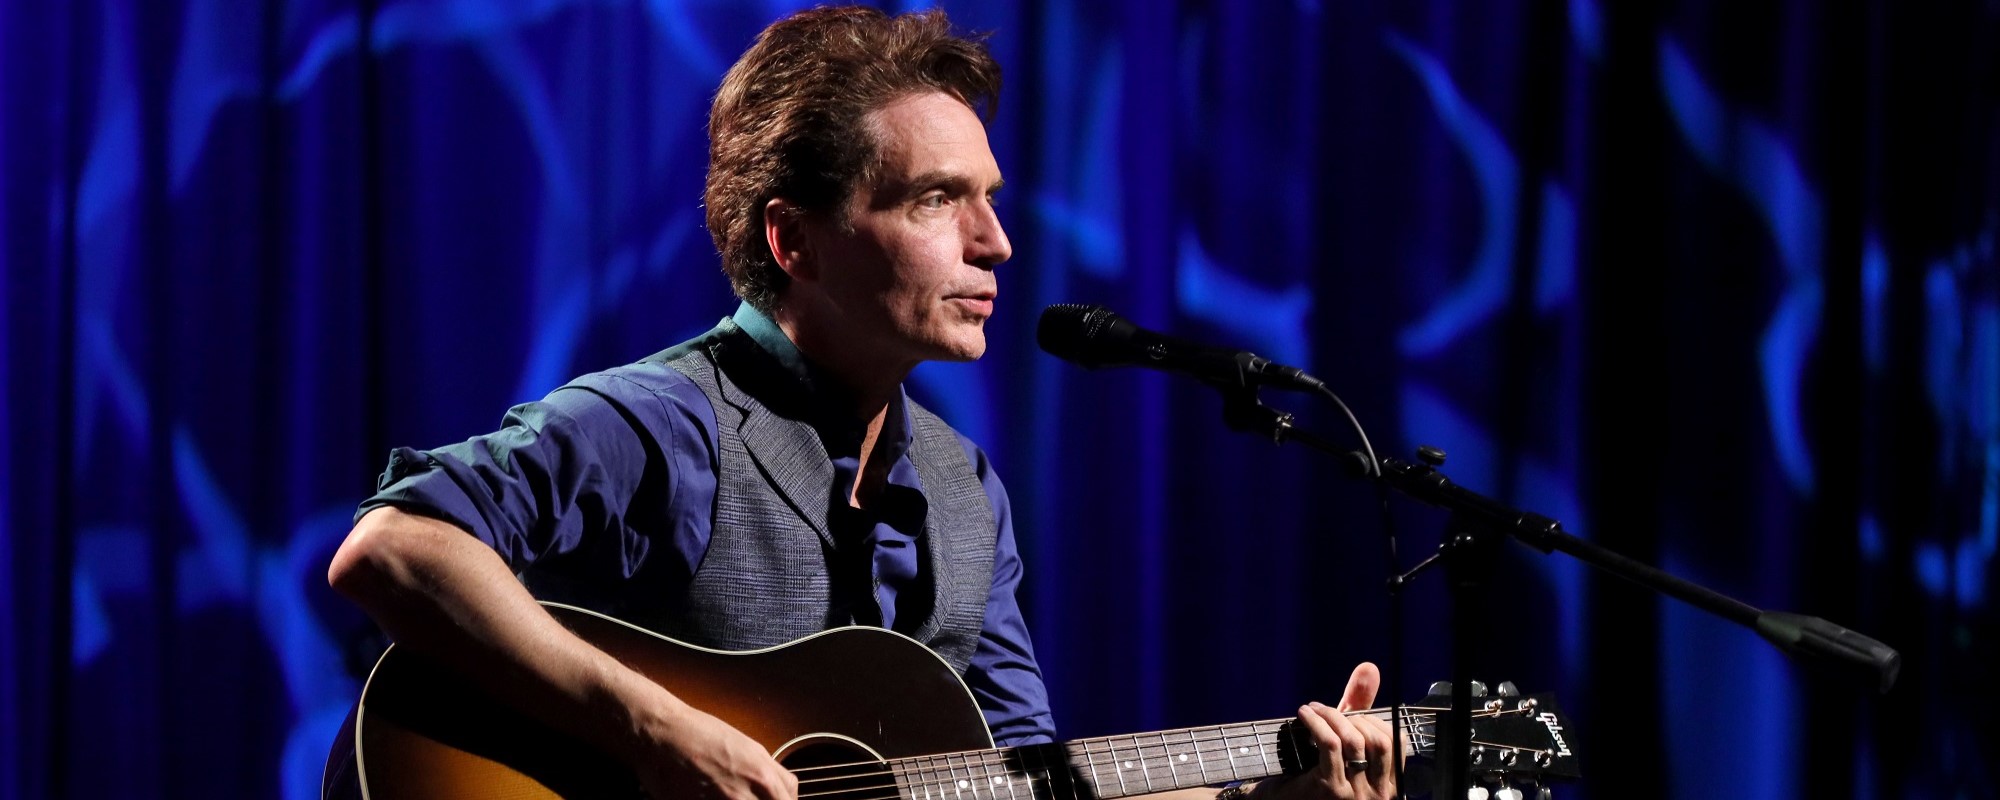 Watch Richard Marx Single Out Female Fan Who Yelled Out During Show with Rick Springfield: “Learn Some F—ing Manners”